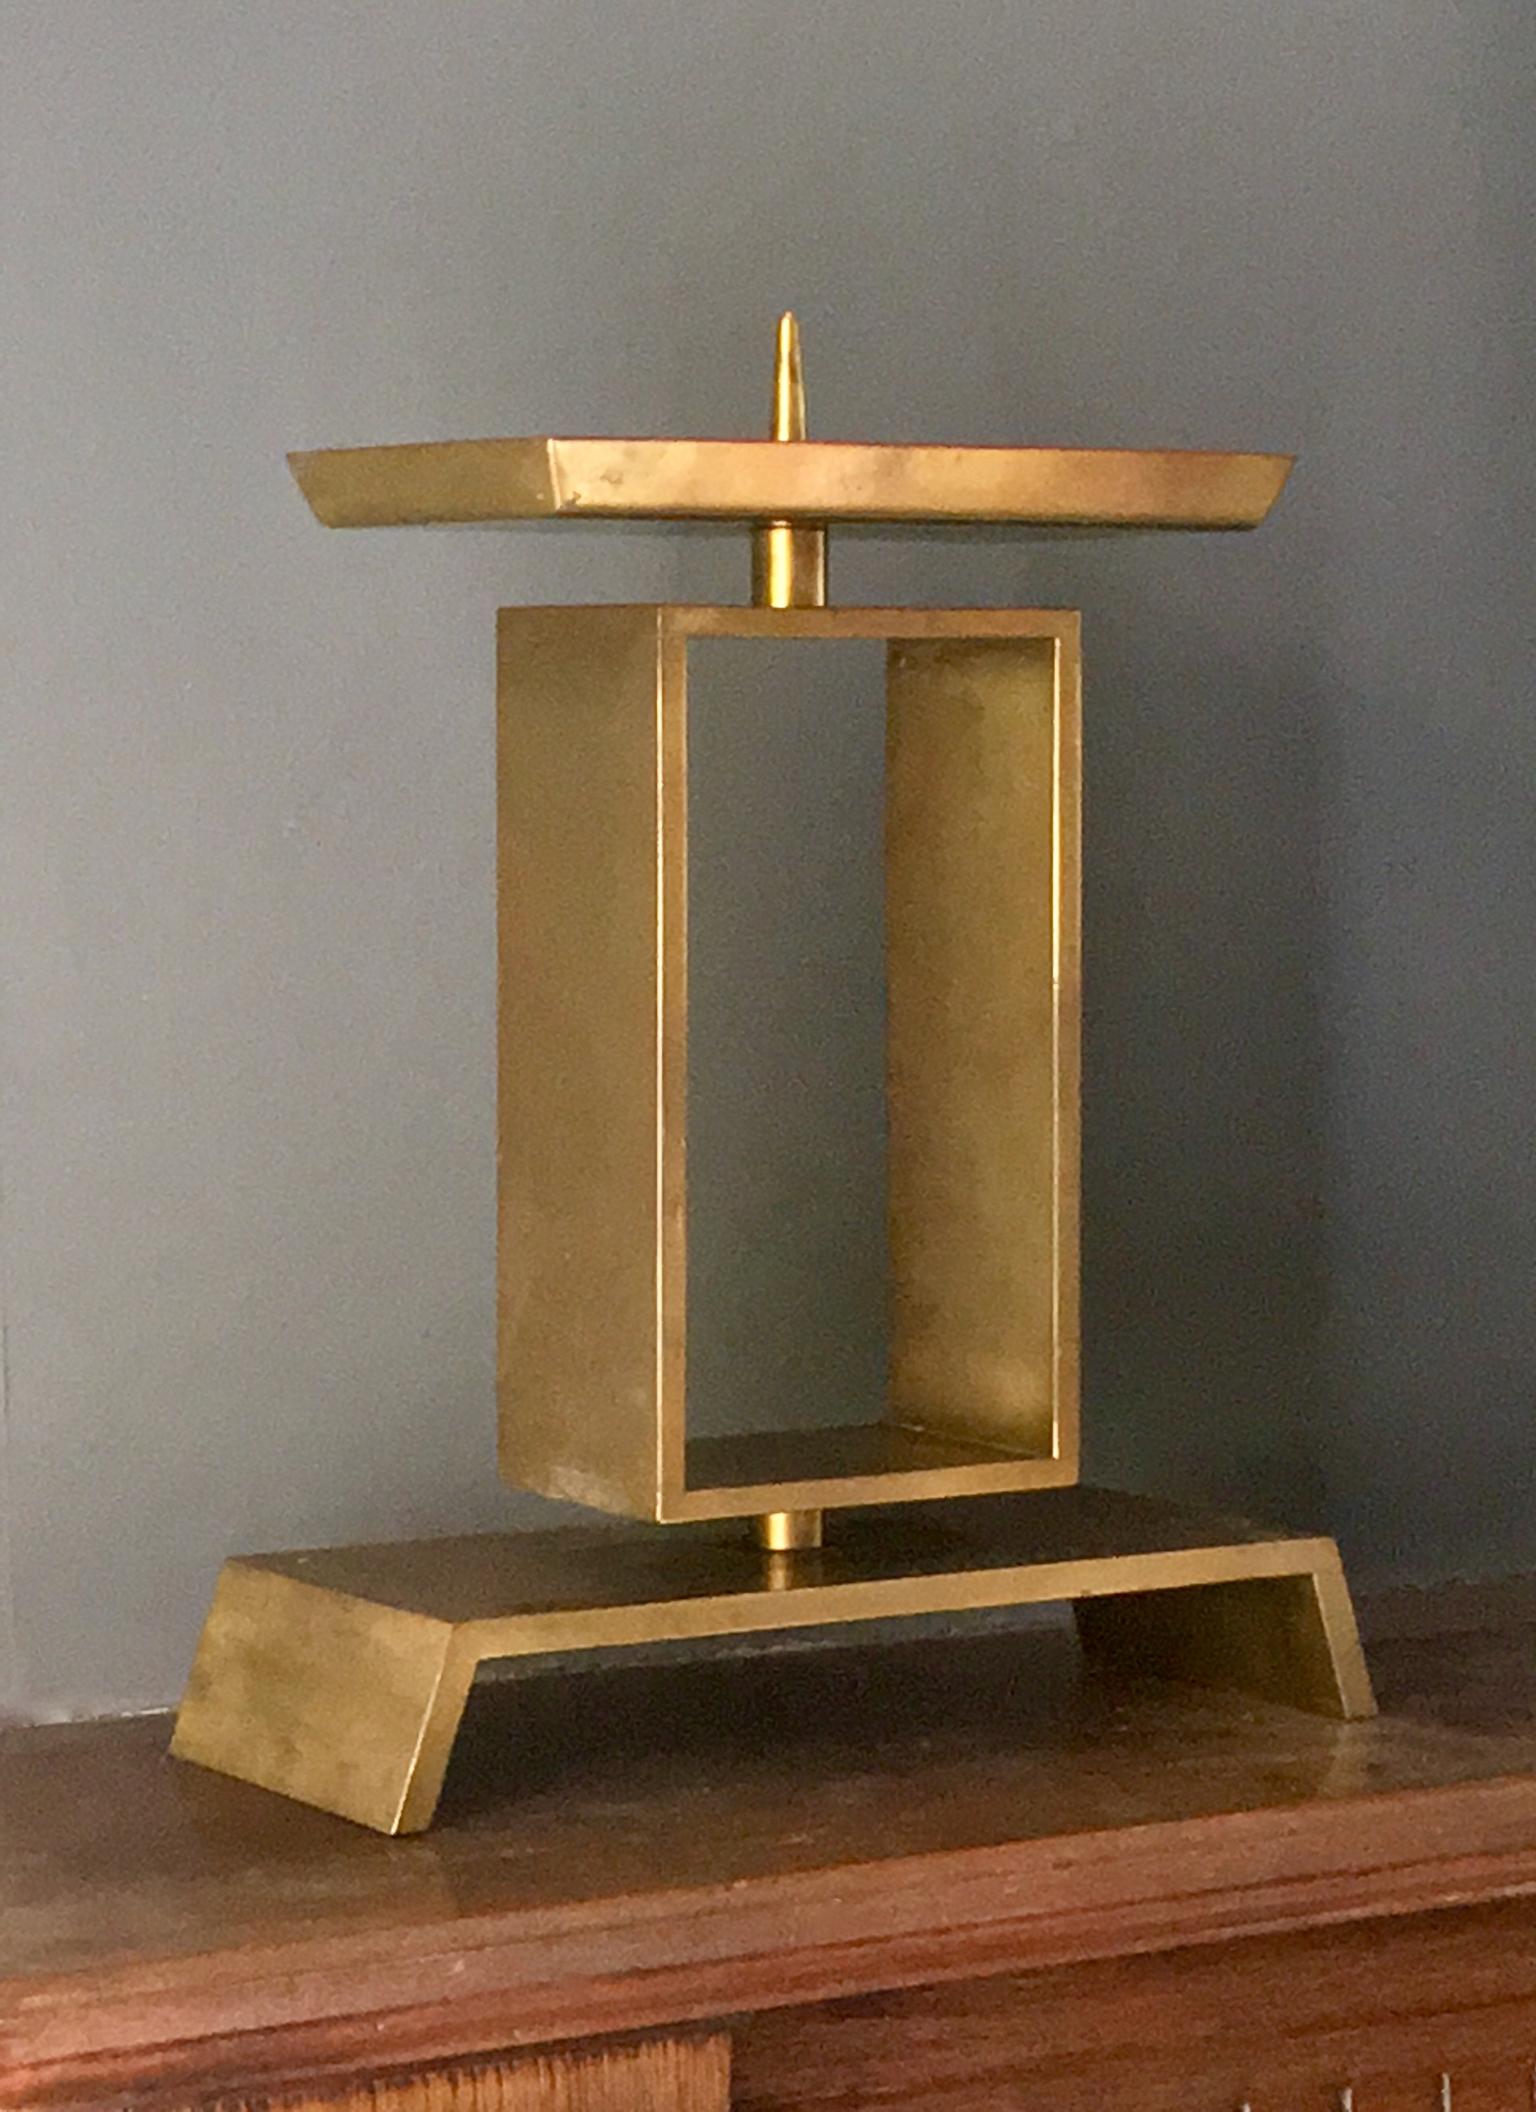 *** Please contact us for availability of this piece. ***

Modernist church candlestick, brass; early to mid-20th century, Germany.

A heavy piece, in good vintage condition with an aged patina - with mellow gold tones - which we have left as found.